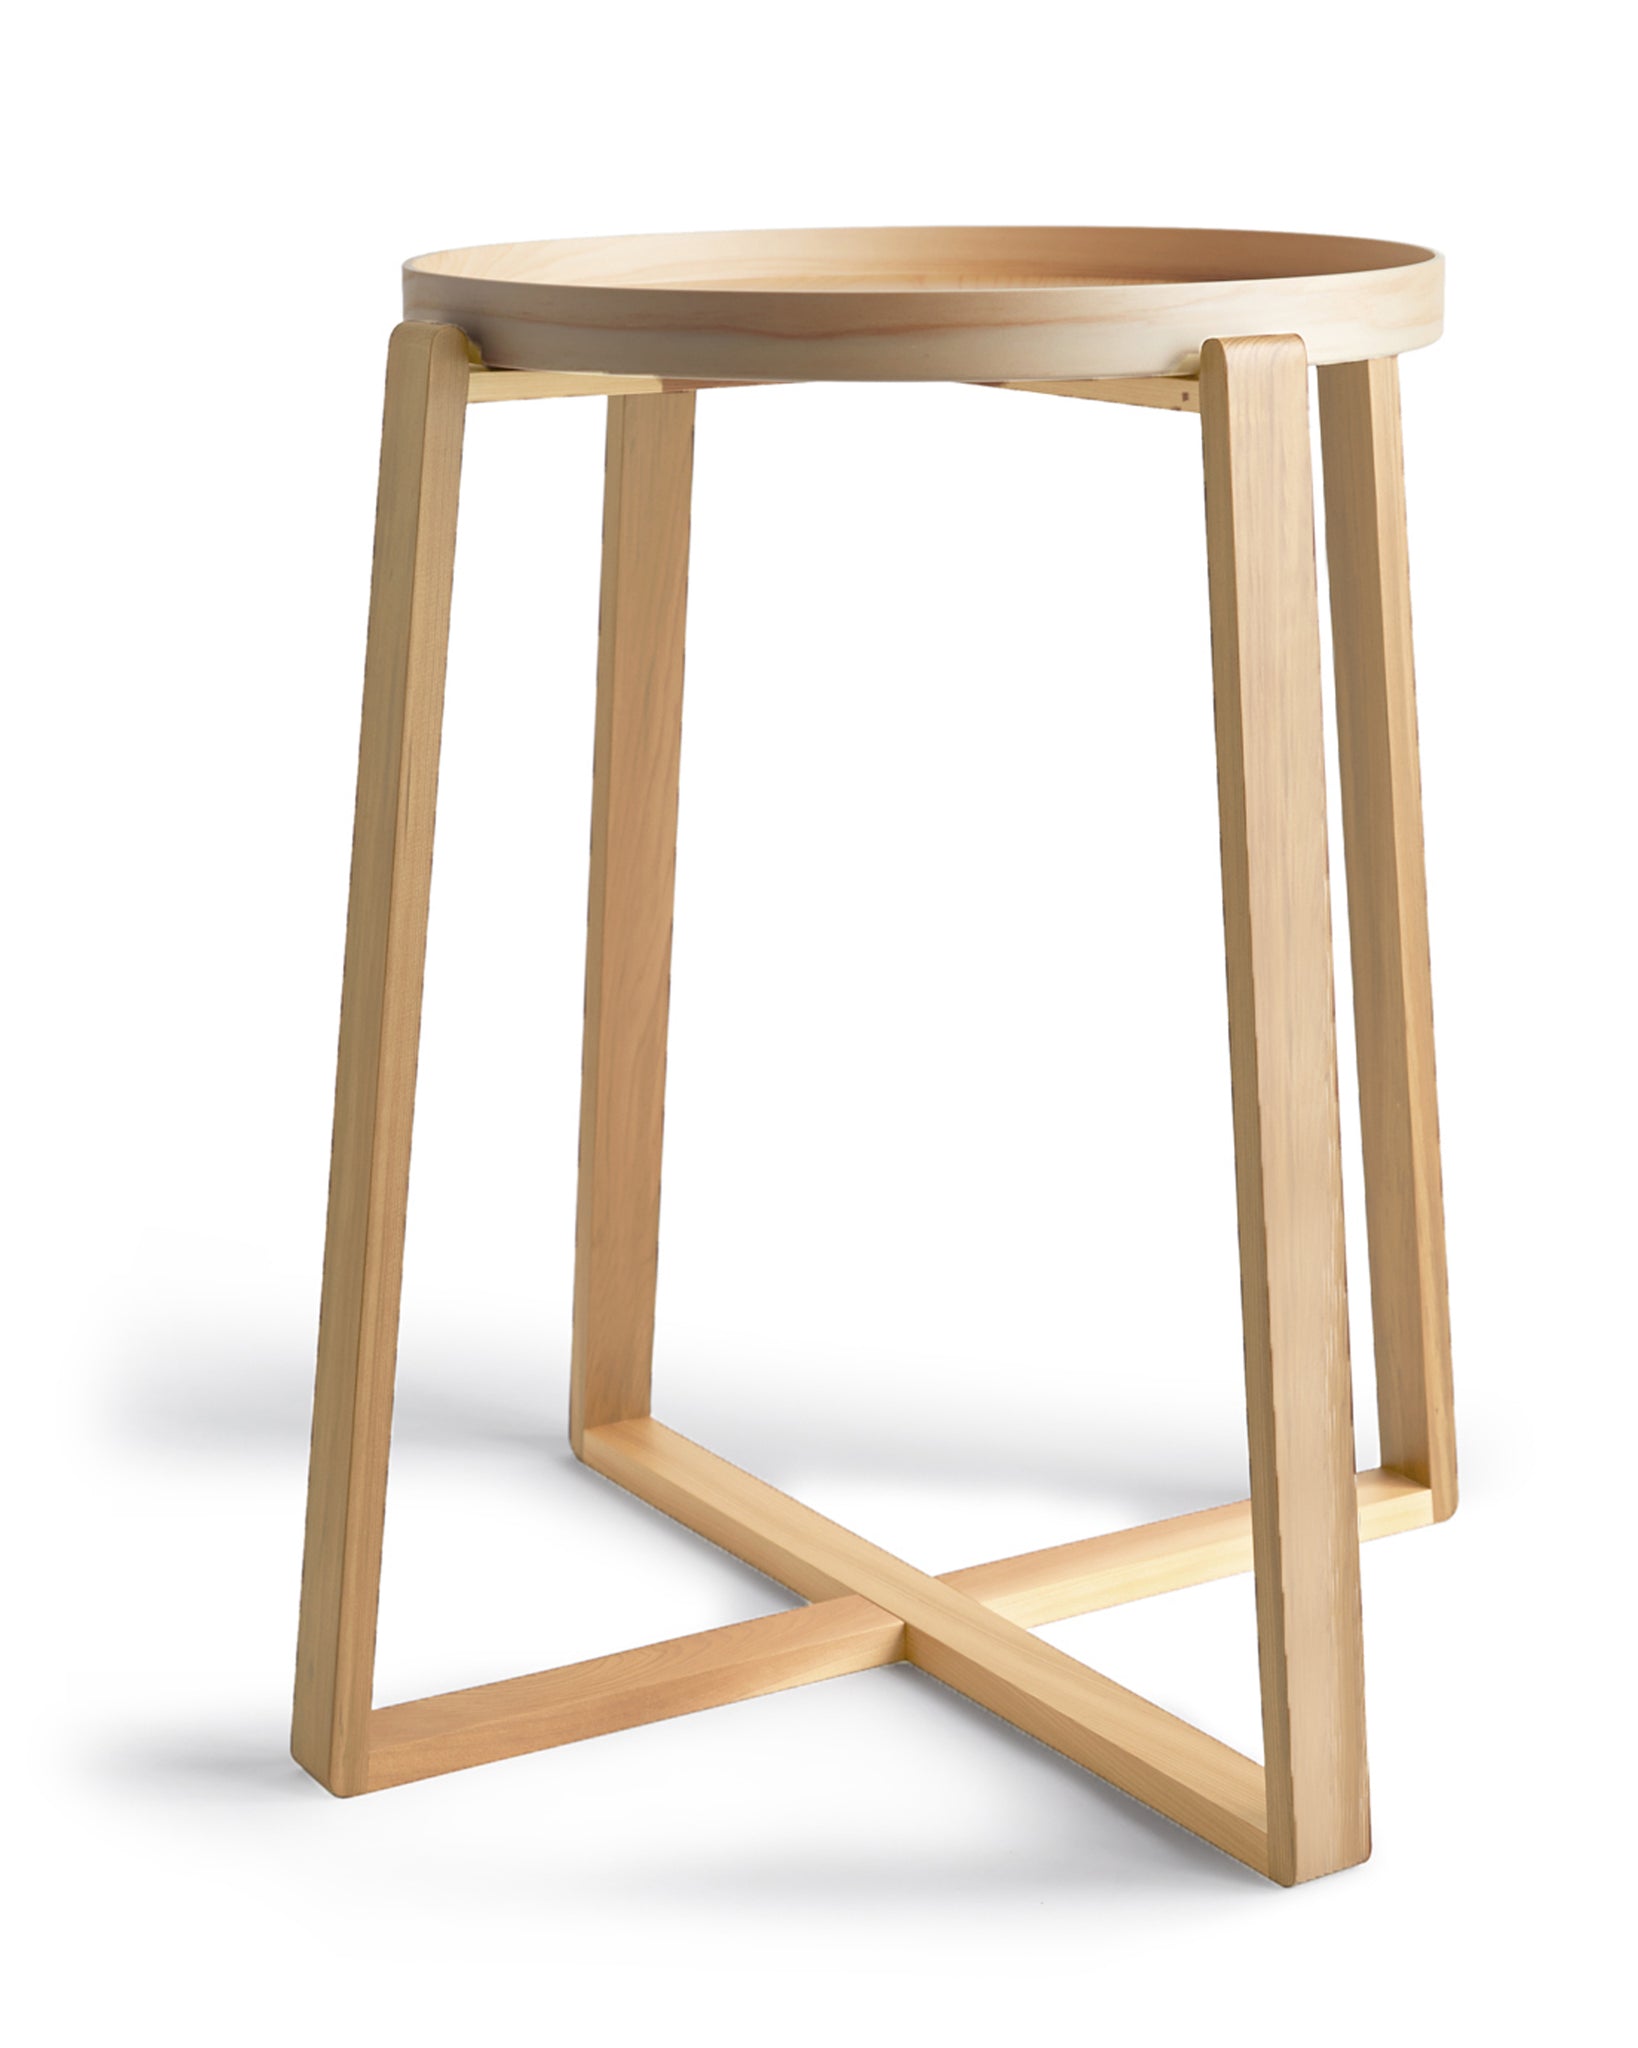 Silhouetted hinoki magewa tray table 450 against white background.